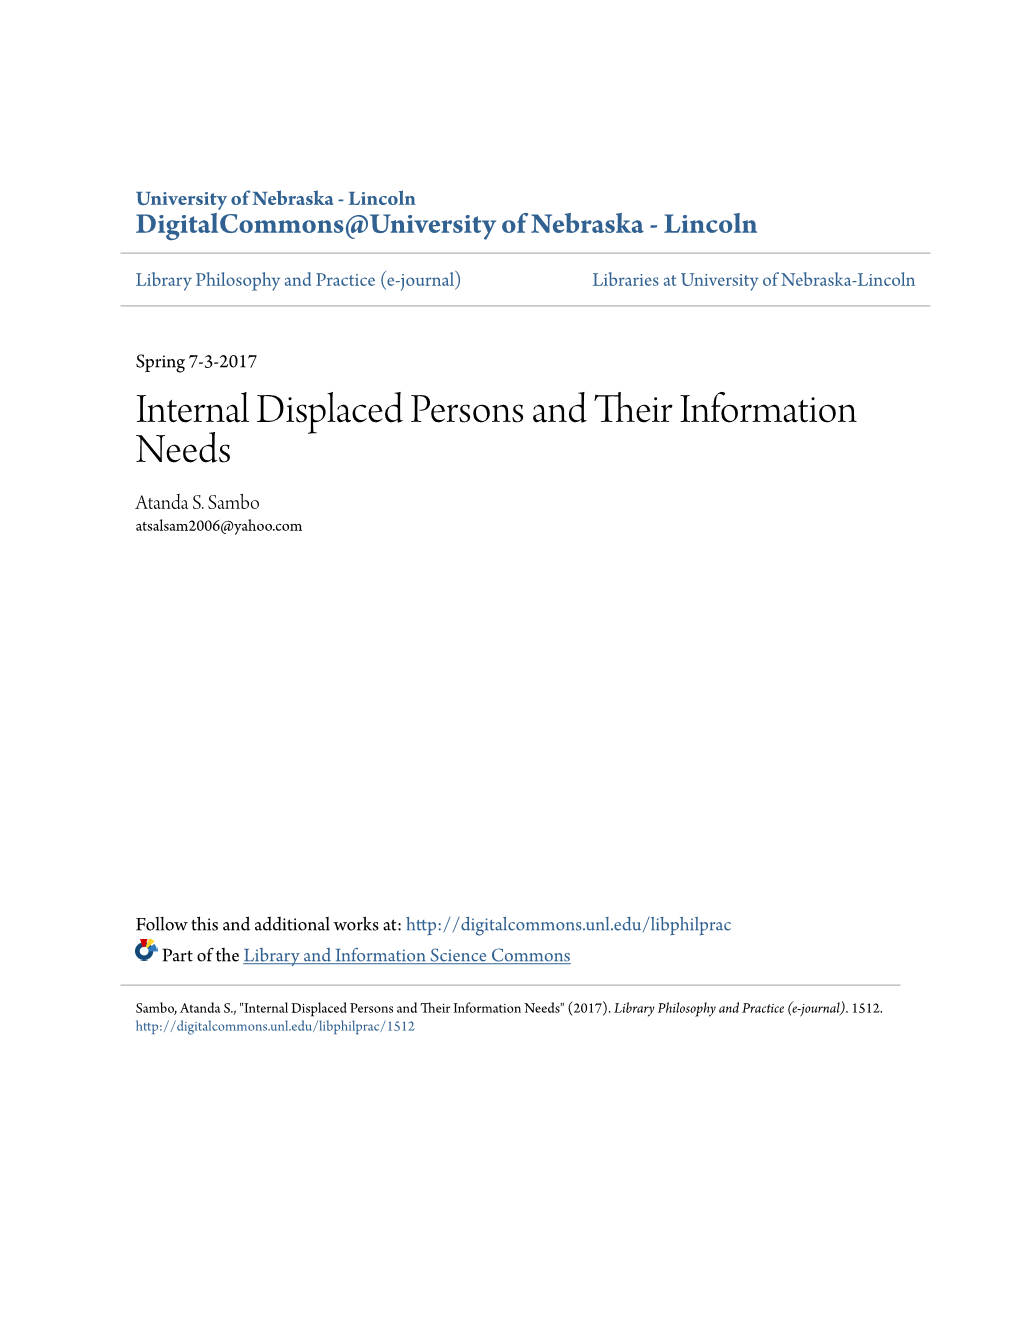 Internal Displaced Persons and Their Information Needs